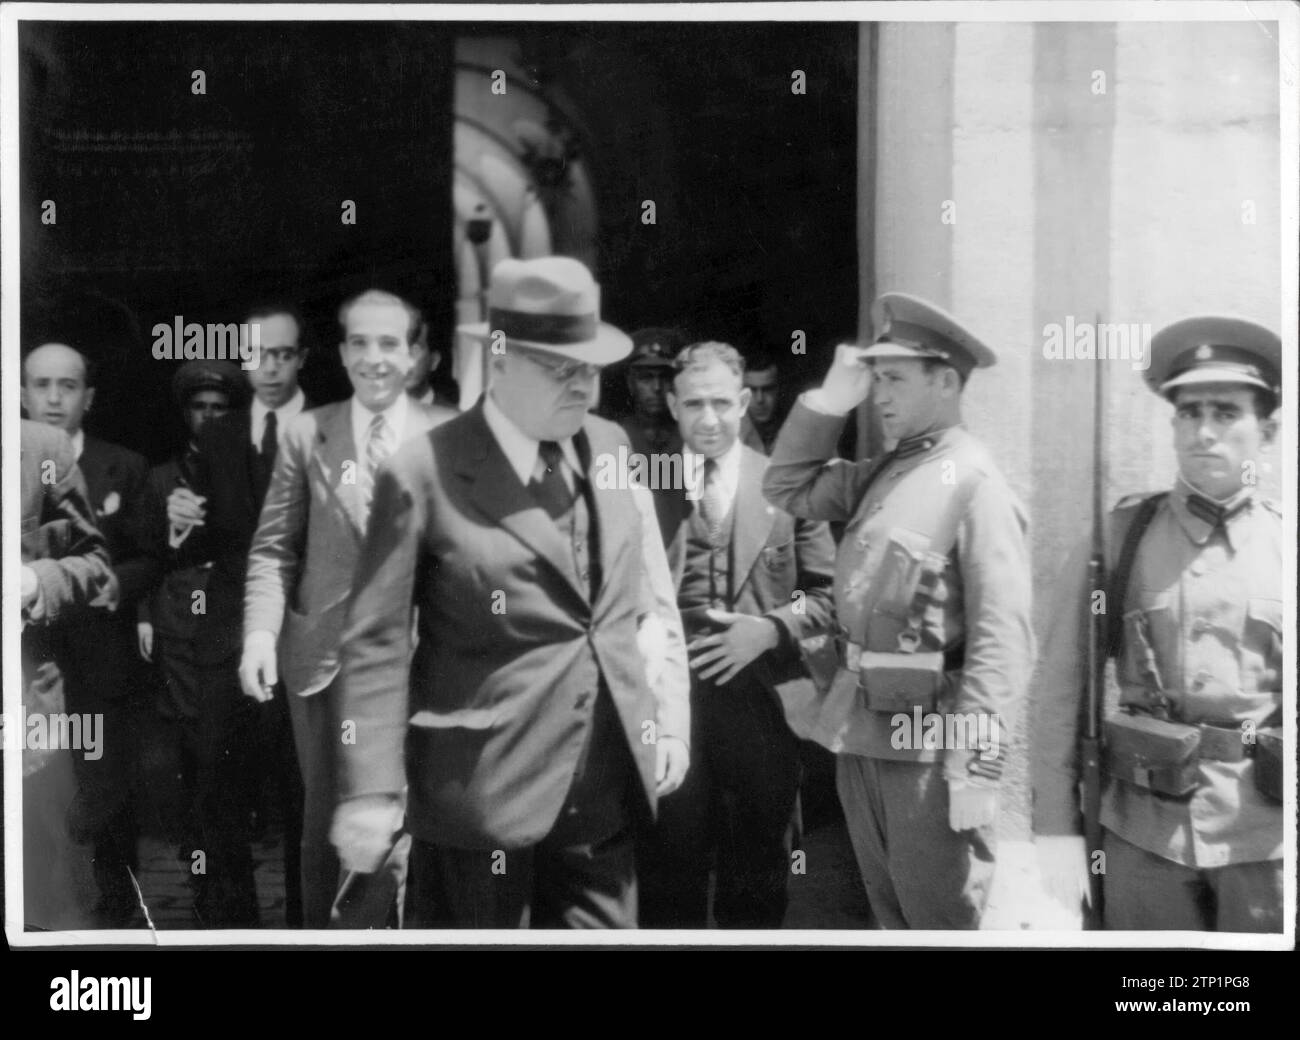 12/31/1936. Dr. Negrin, head of the Government, upon leaving the presidency. Credit: Album / Archivo ABC / Sisito Stock Photo